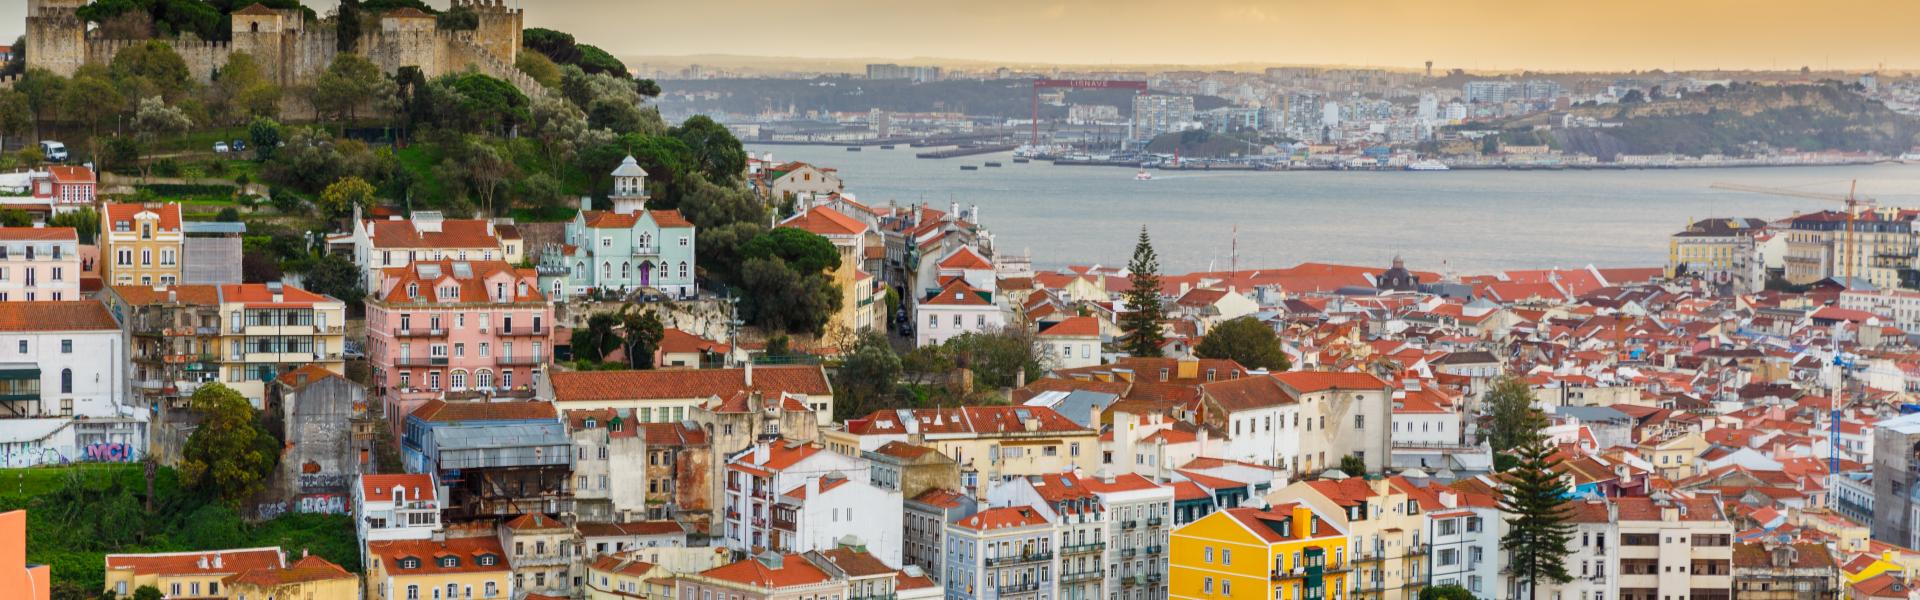 Holiday lettings & accommodation in Lisbon - Wimdu